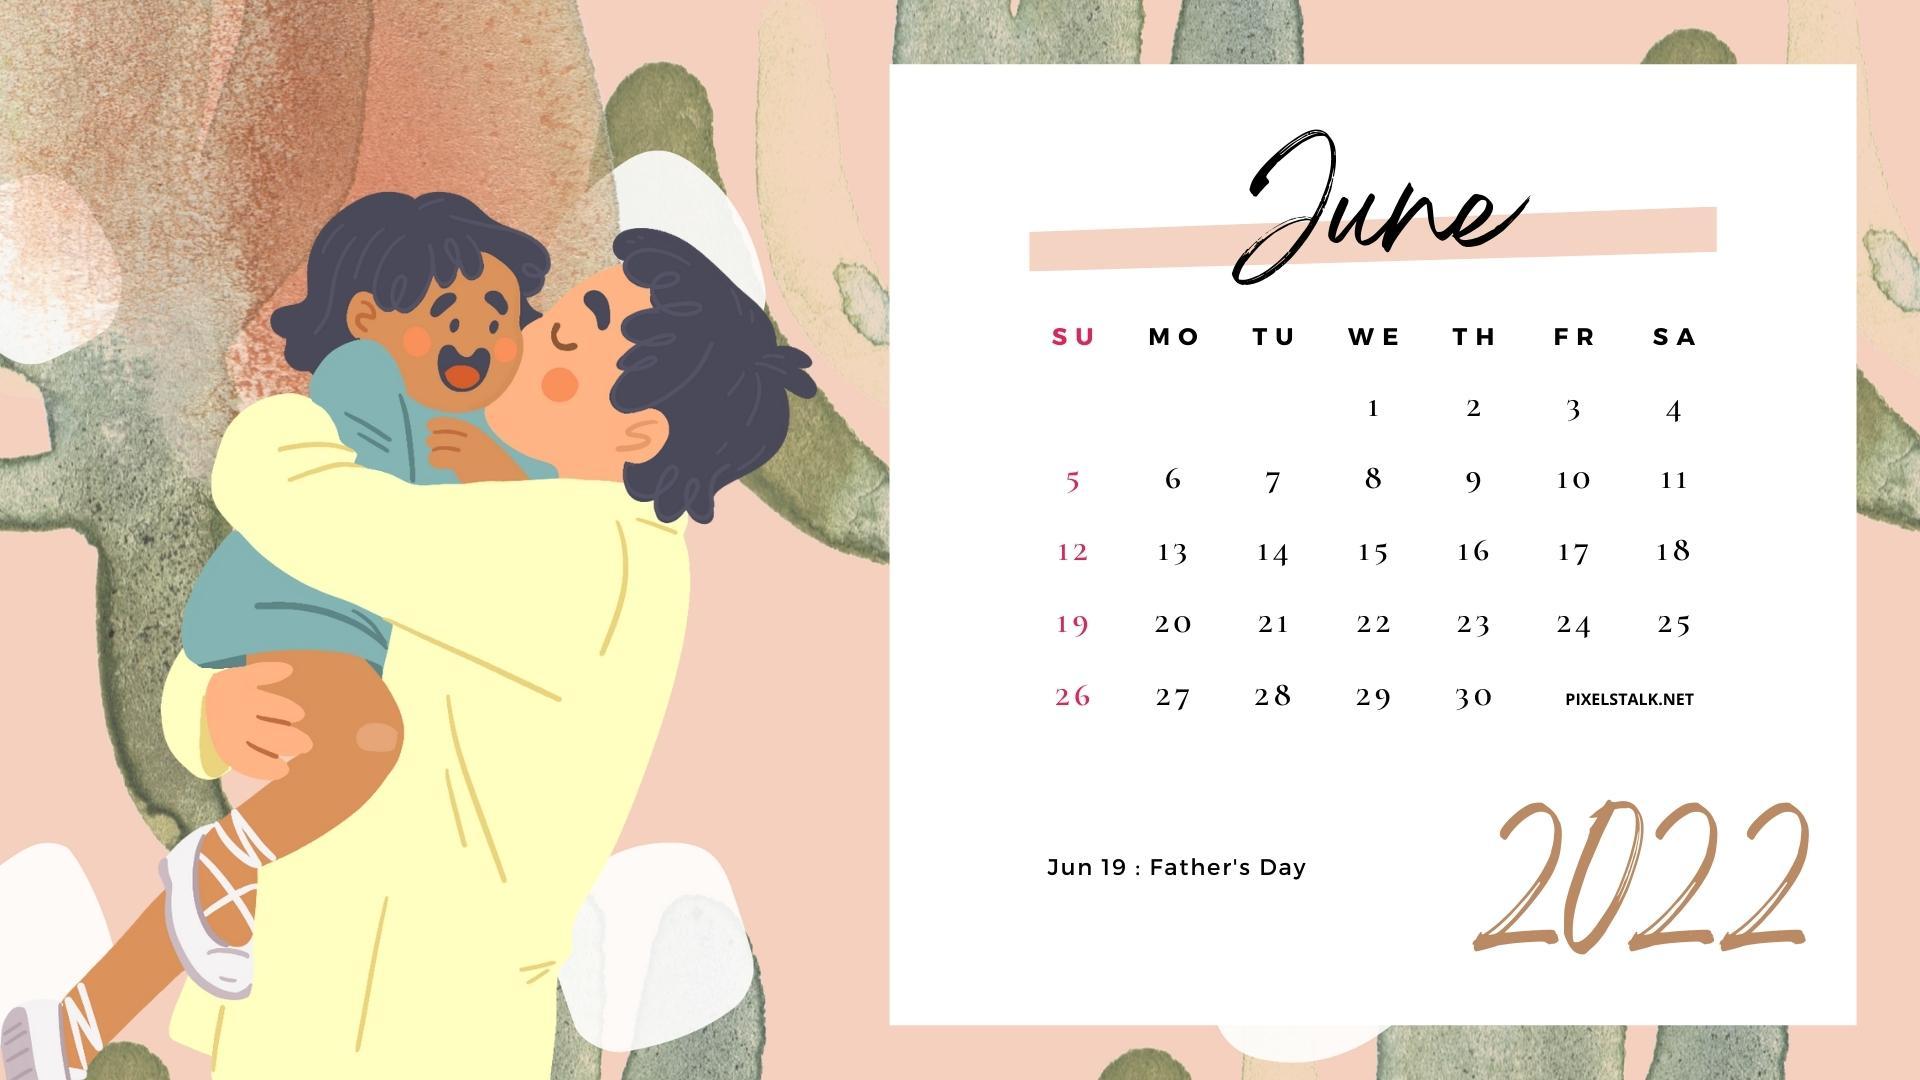 June 2022 Calendar Wallpaper Images  Free Photos PNG Stickers Wallpapers   Backgrounds  rawpixel